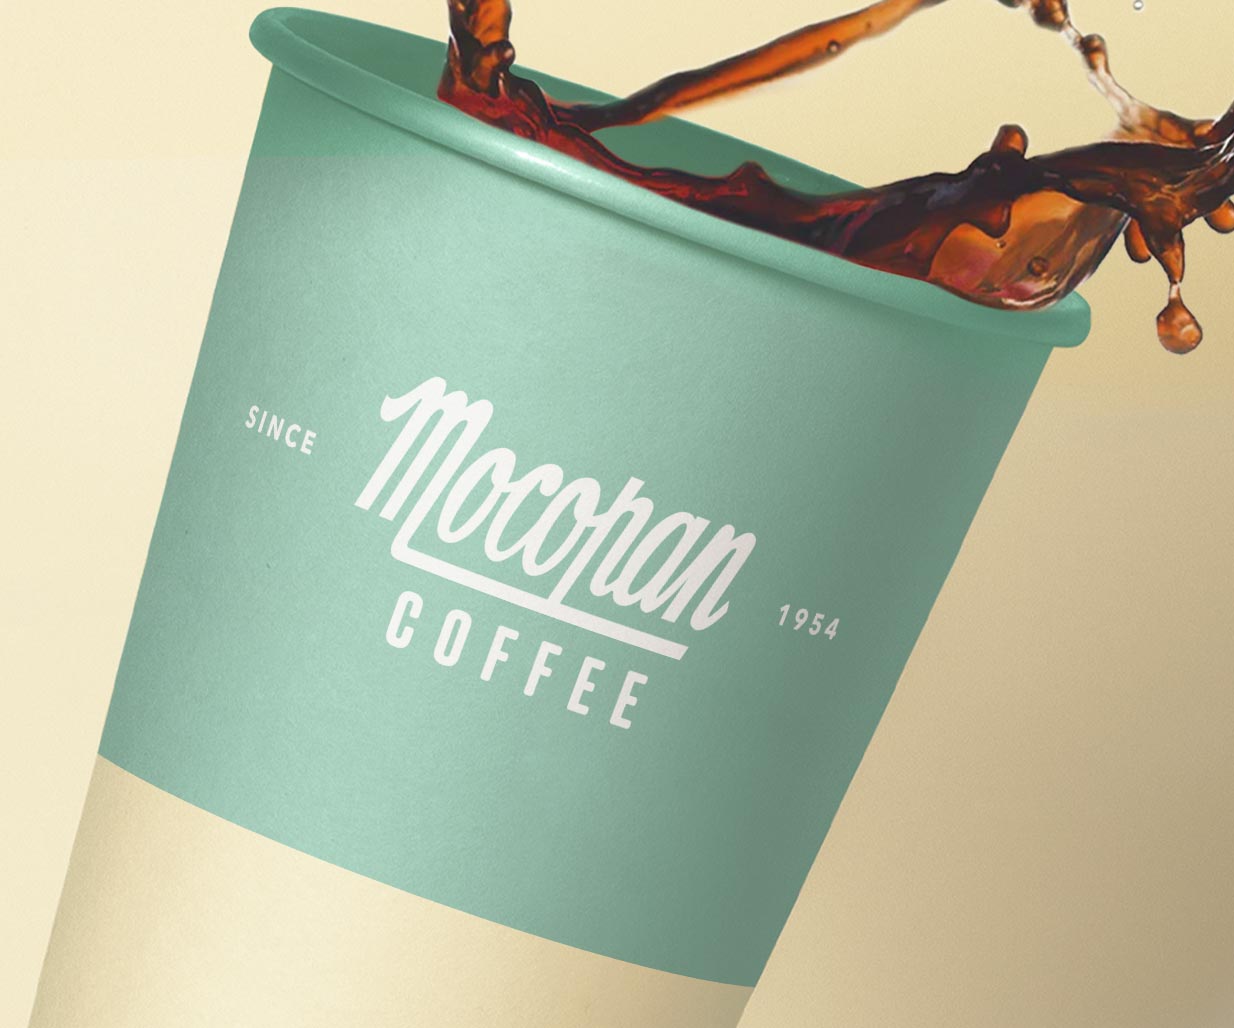 Brand design agency, Percept, creates new packaging design for Suntory's Mocopan Coffee as part of a brand refresh project, image C